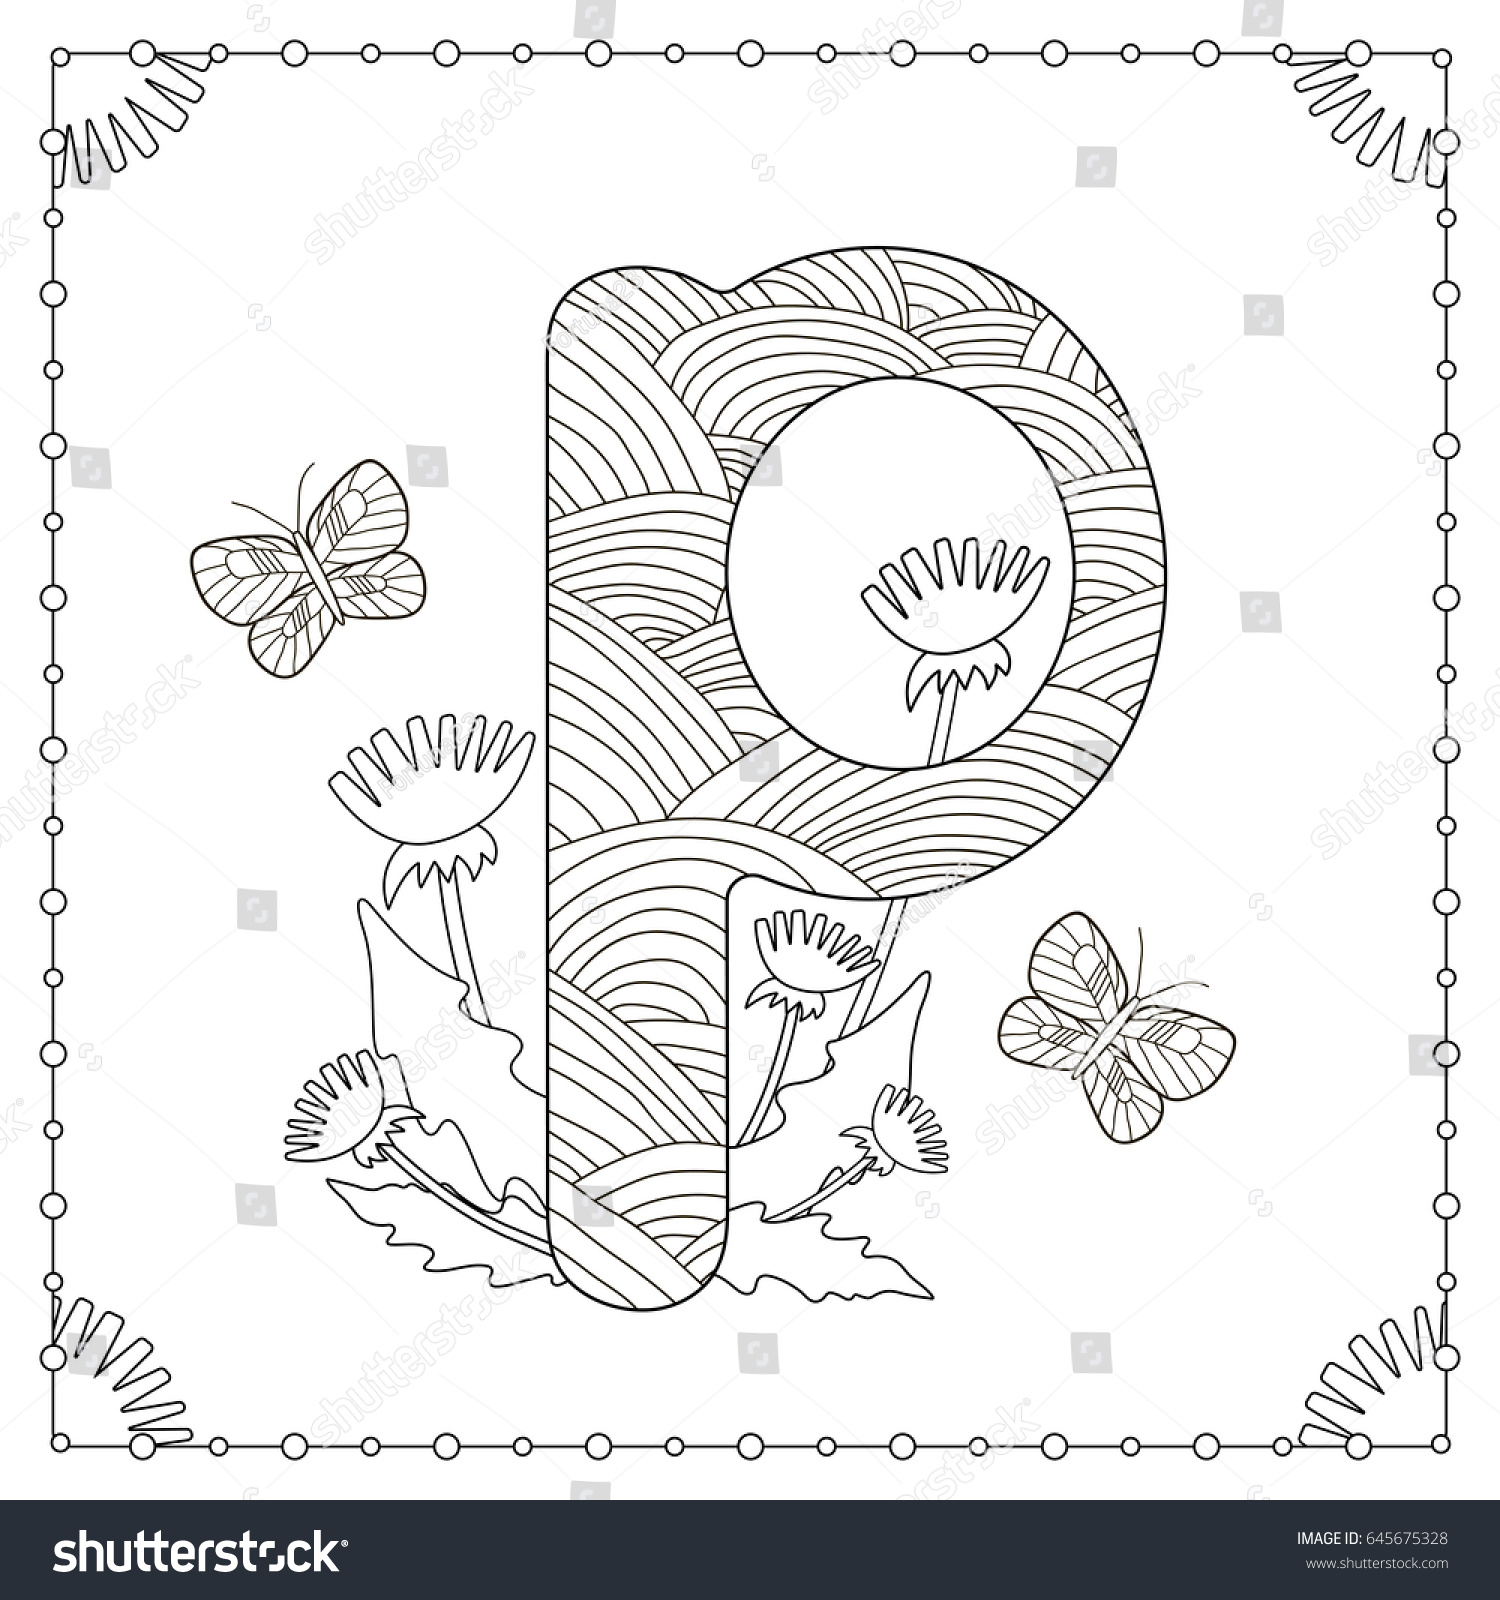 Alphabet Coloring Page Capital Letter P Stock Vector